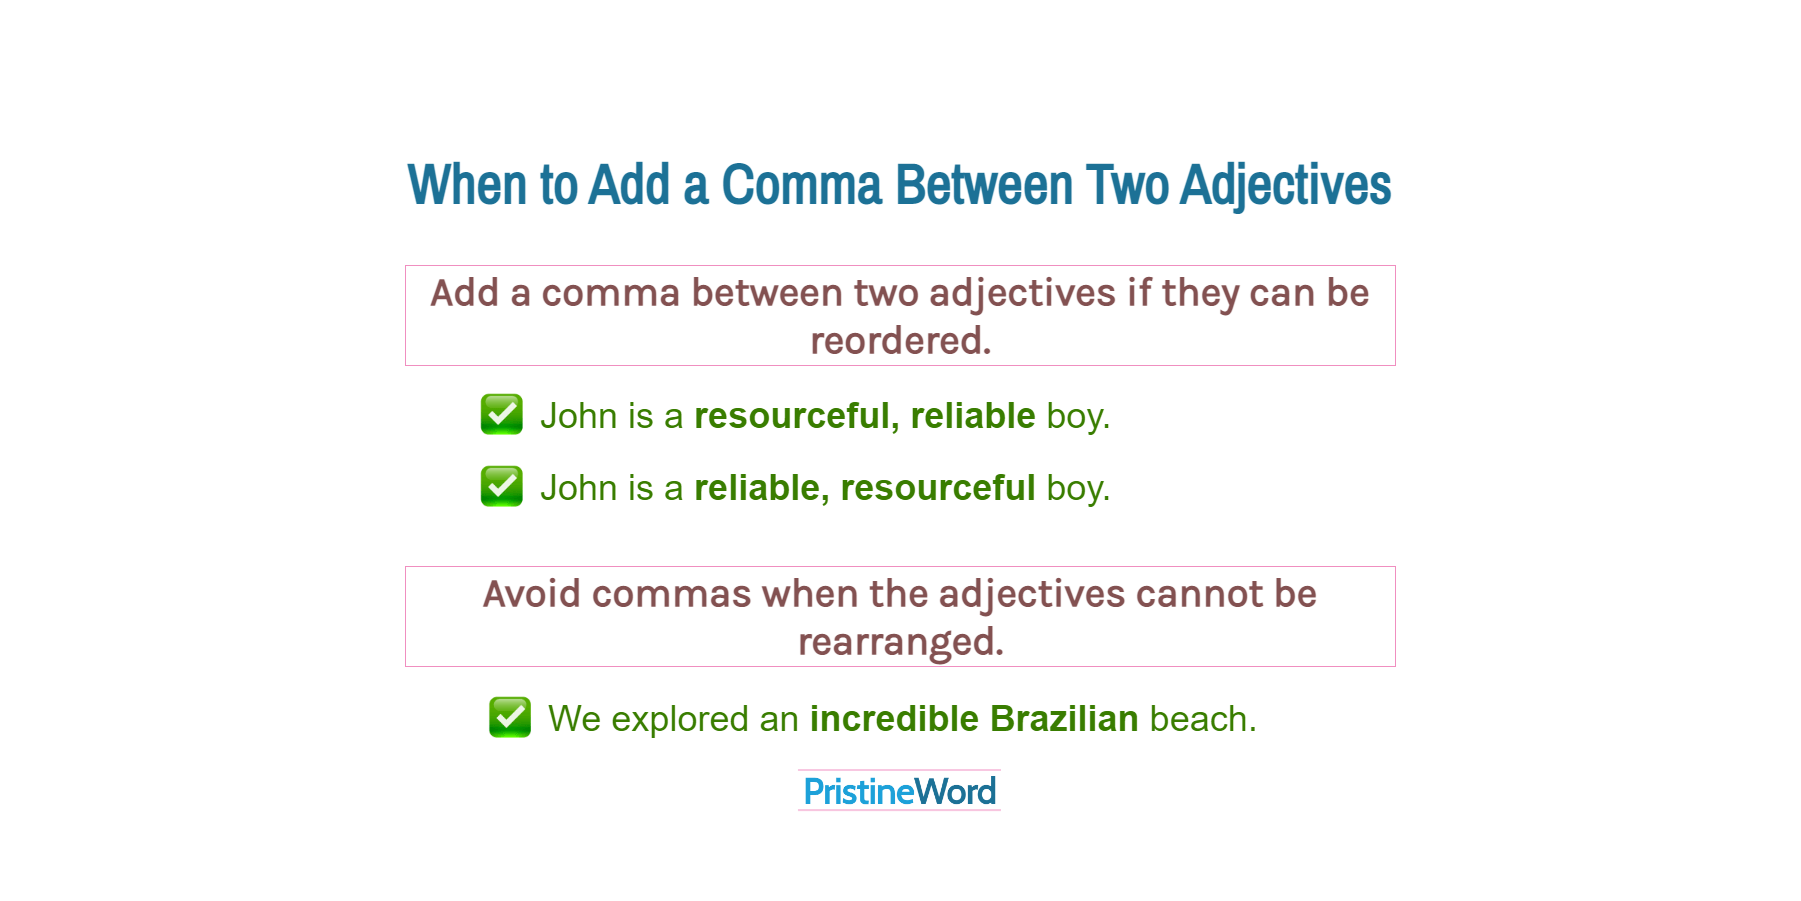 When to Add a Comma Between Two Adjectives